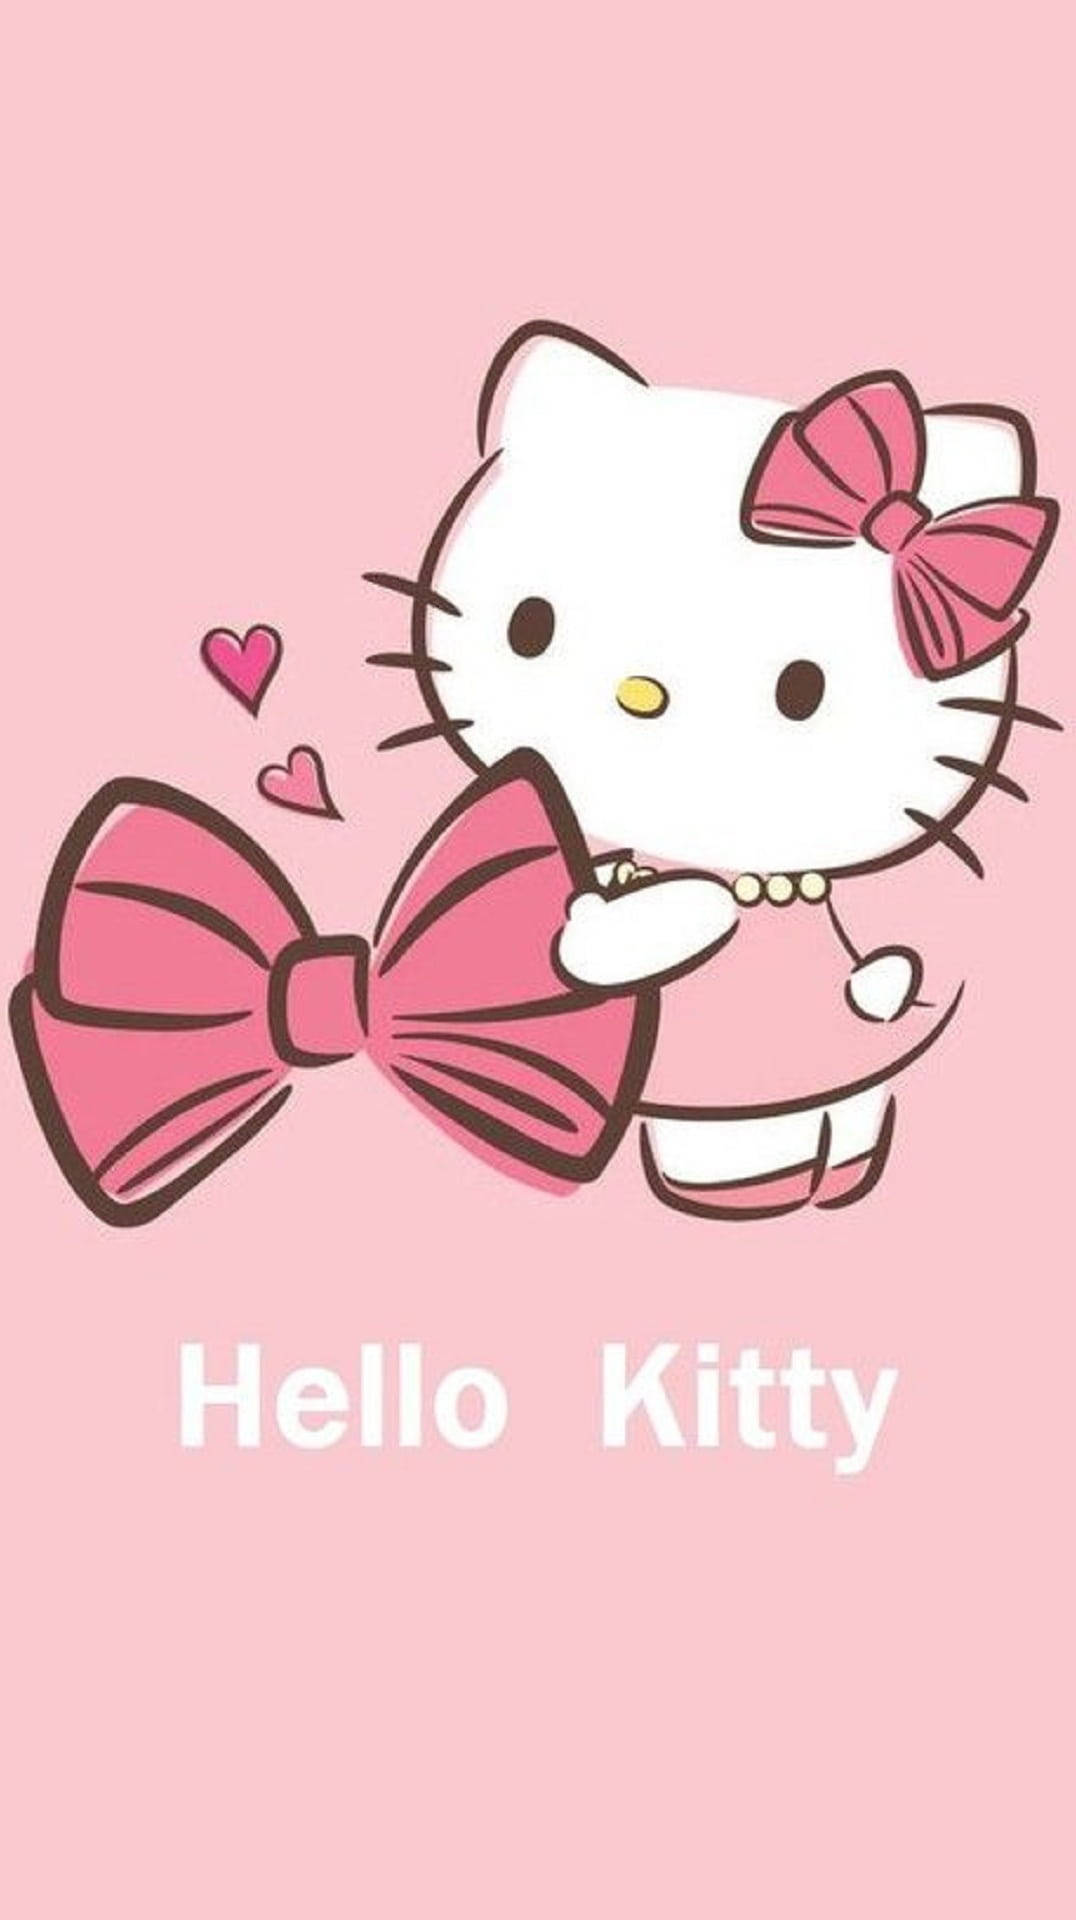 Download Pink Hello Kitty Holding A Bow Wallpaper